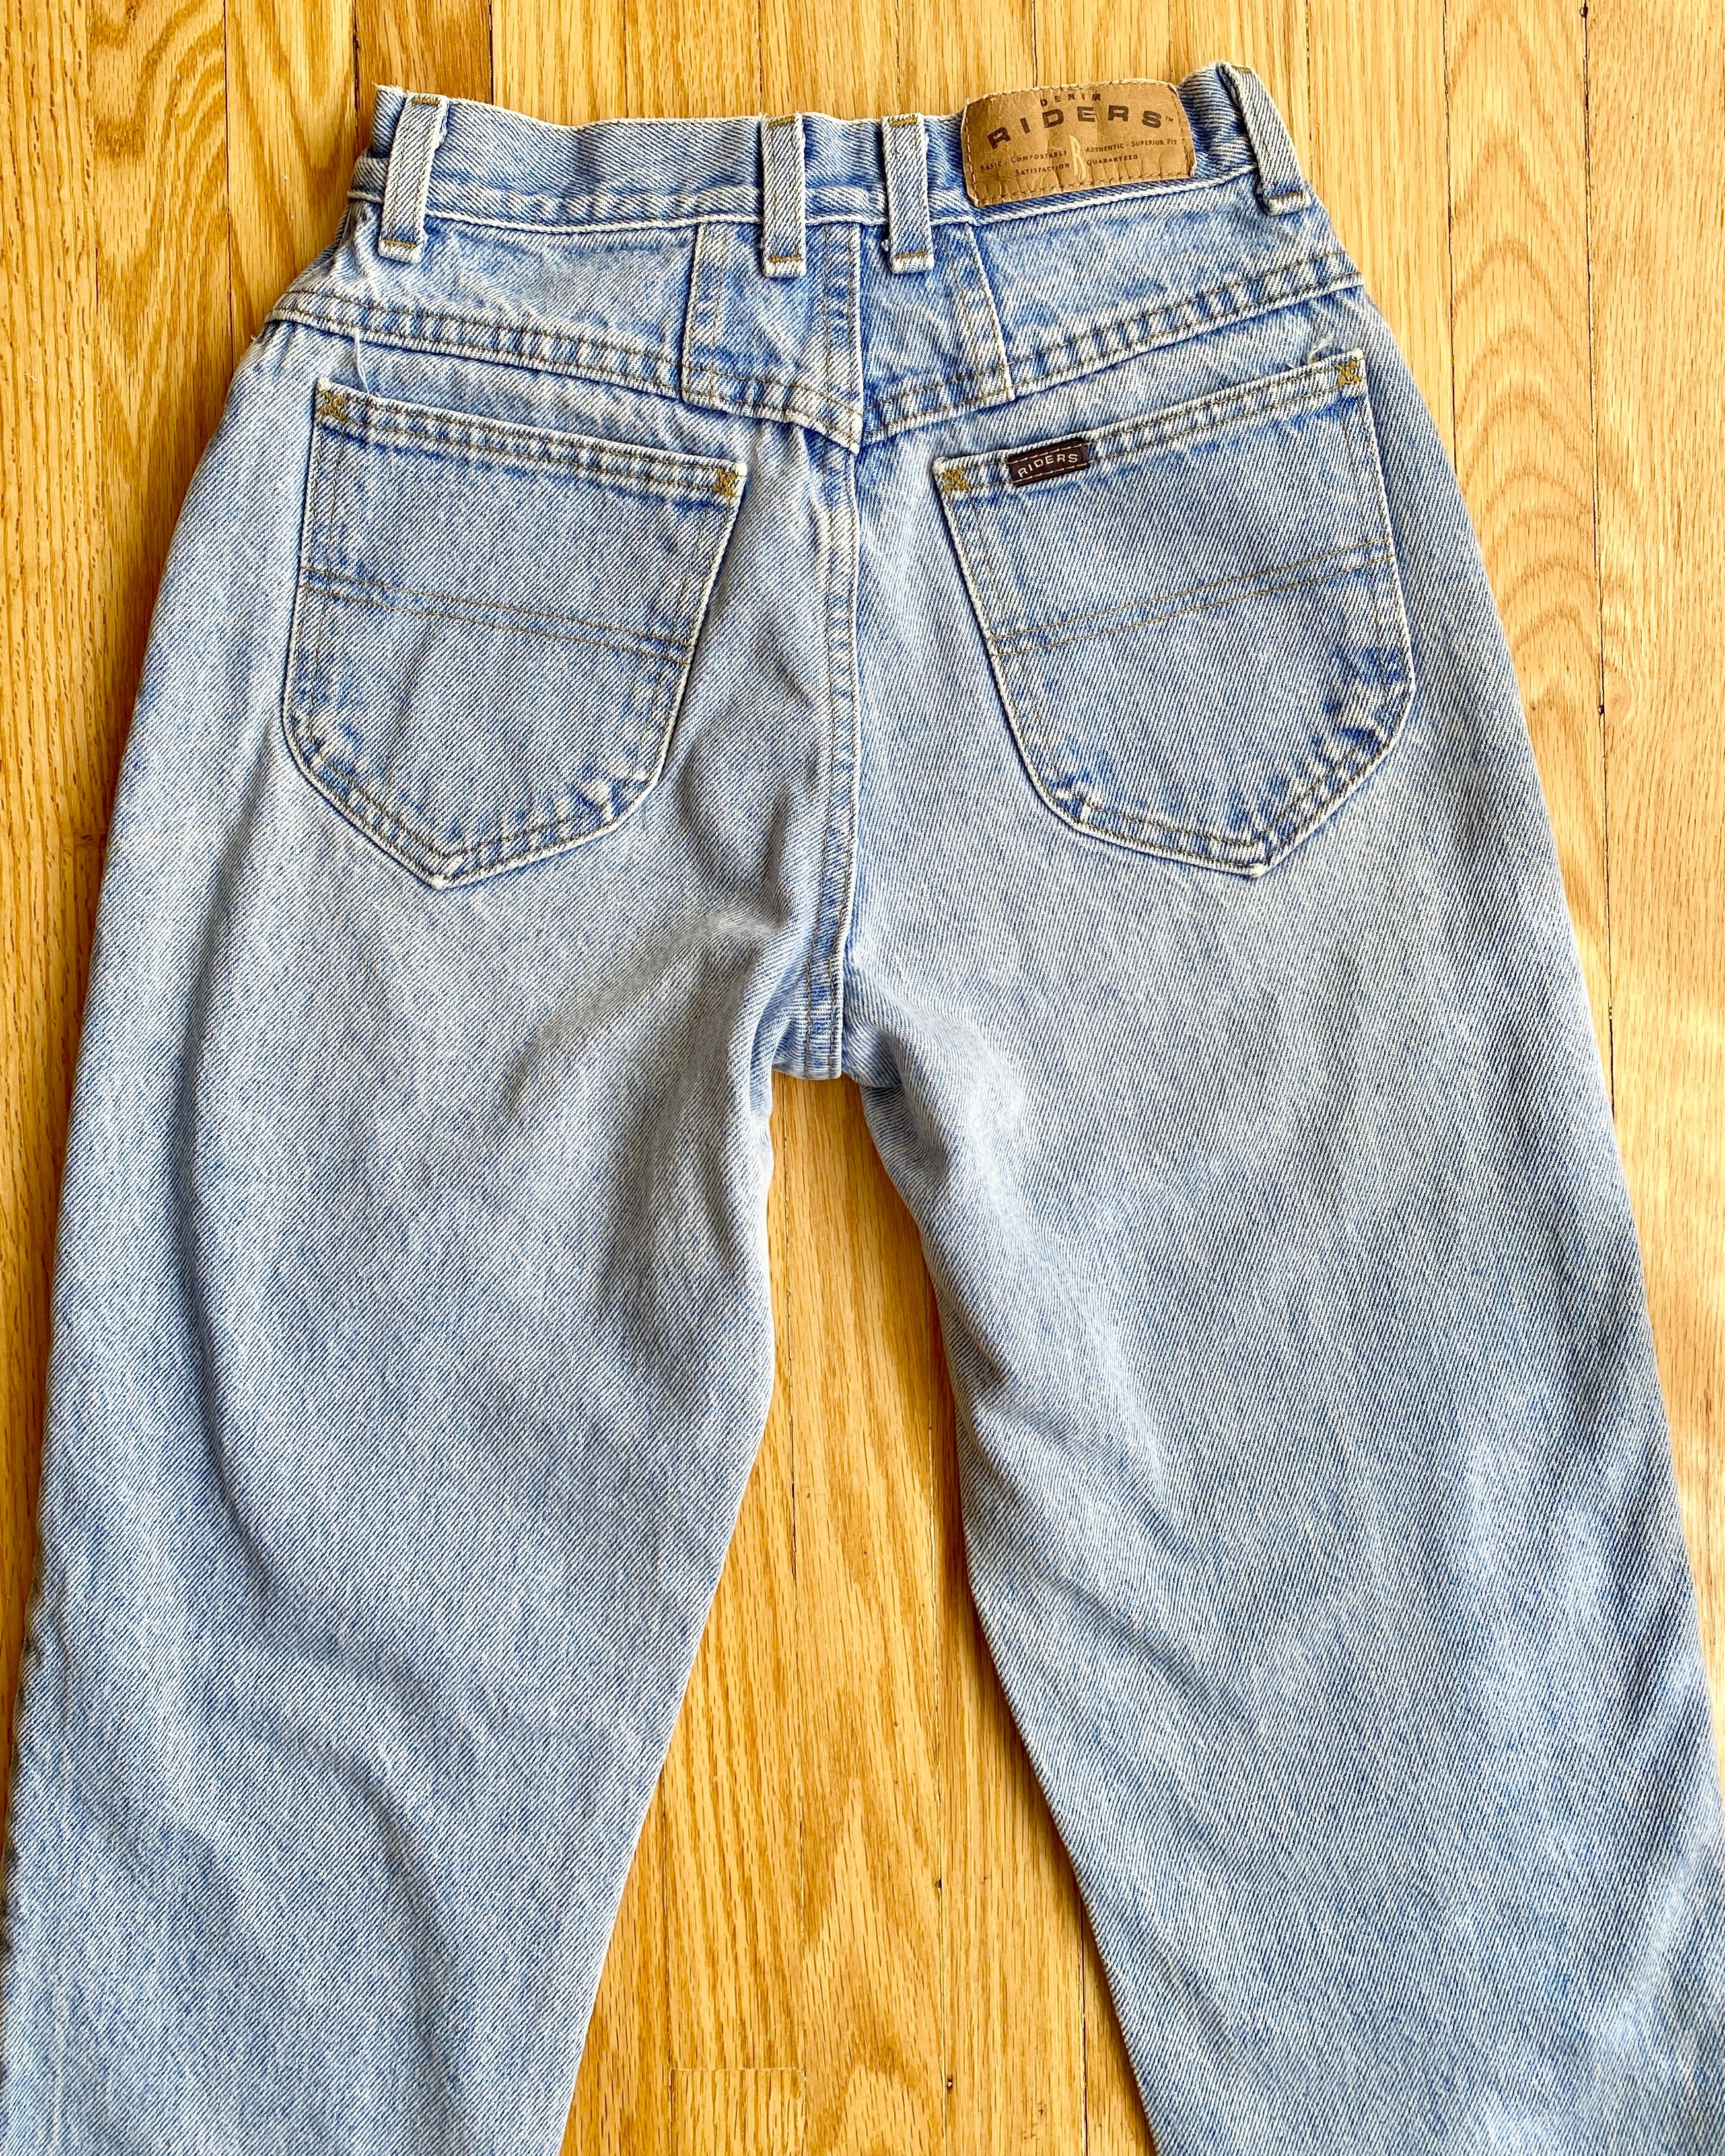 Vintage Riders Light Wash Jeans size 25 Made in USA